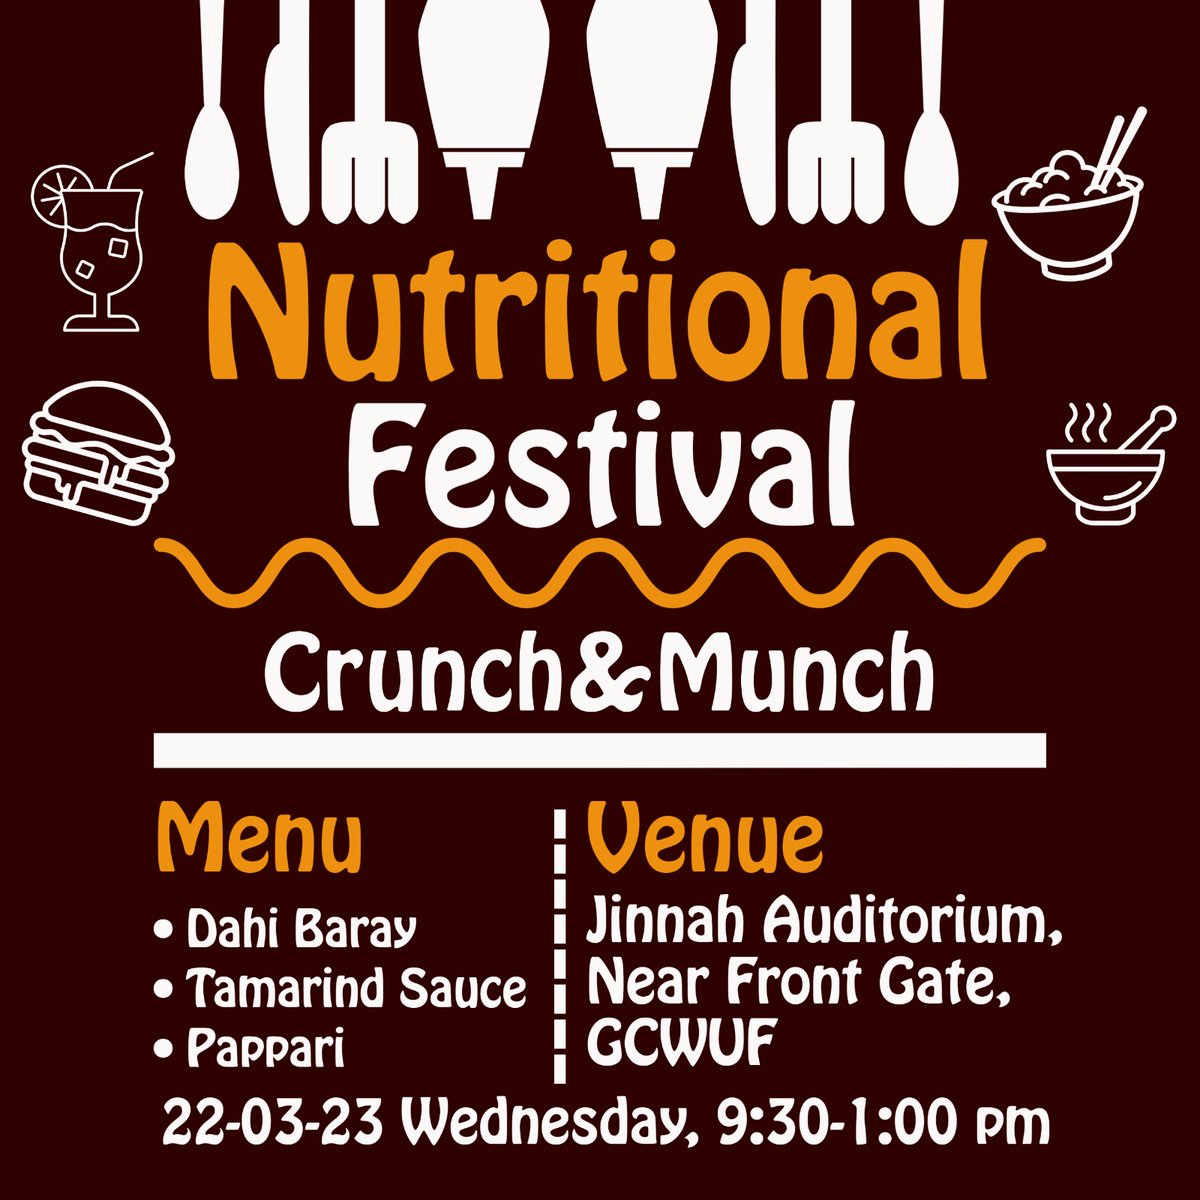 Come and Join Us to Enjoy The Crisp of Life 😍❤️✨
#Nutritionalscience
#Nutritionalfestival
#gcwuf